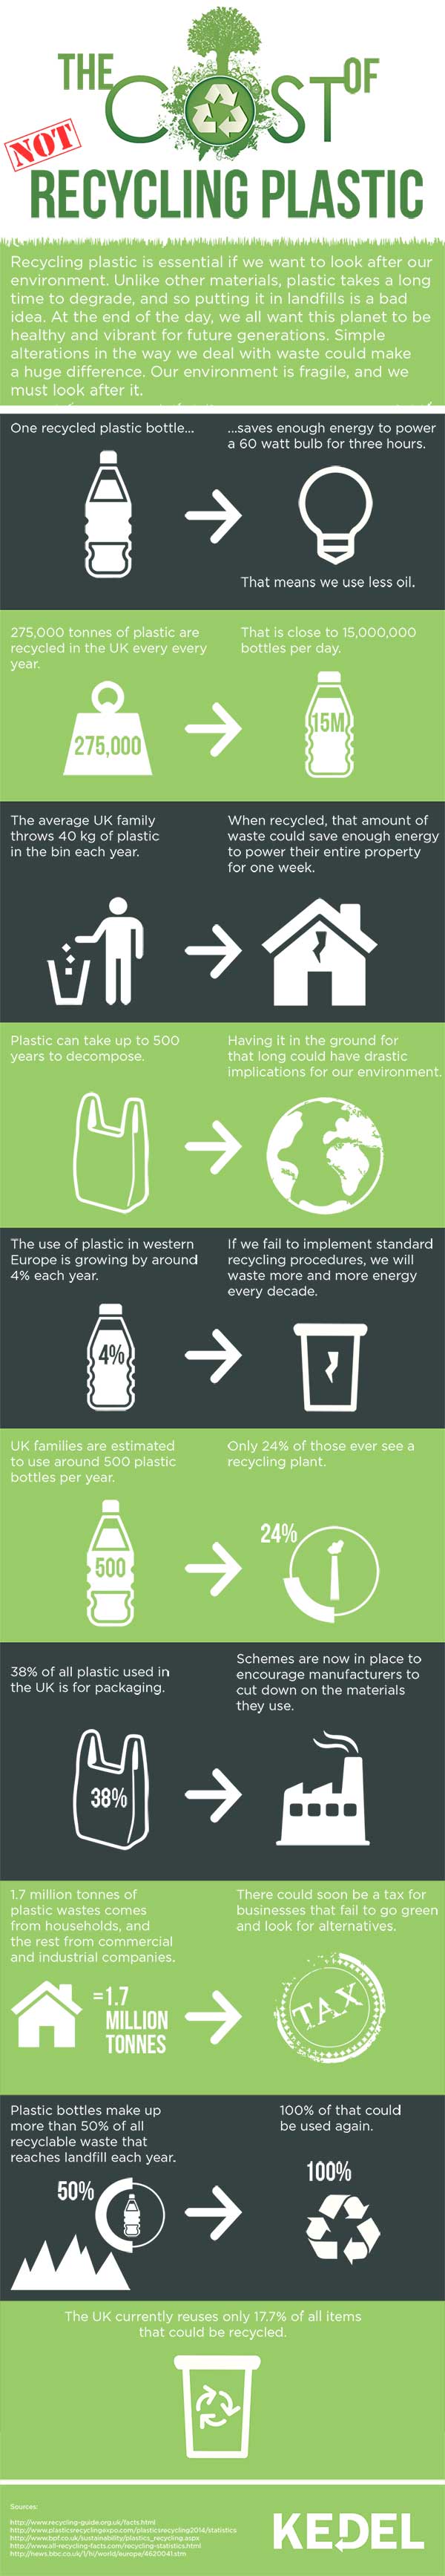 Teaching the Importance of Recycling Waste Plastic - The Facts